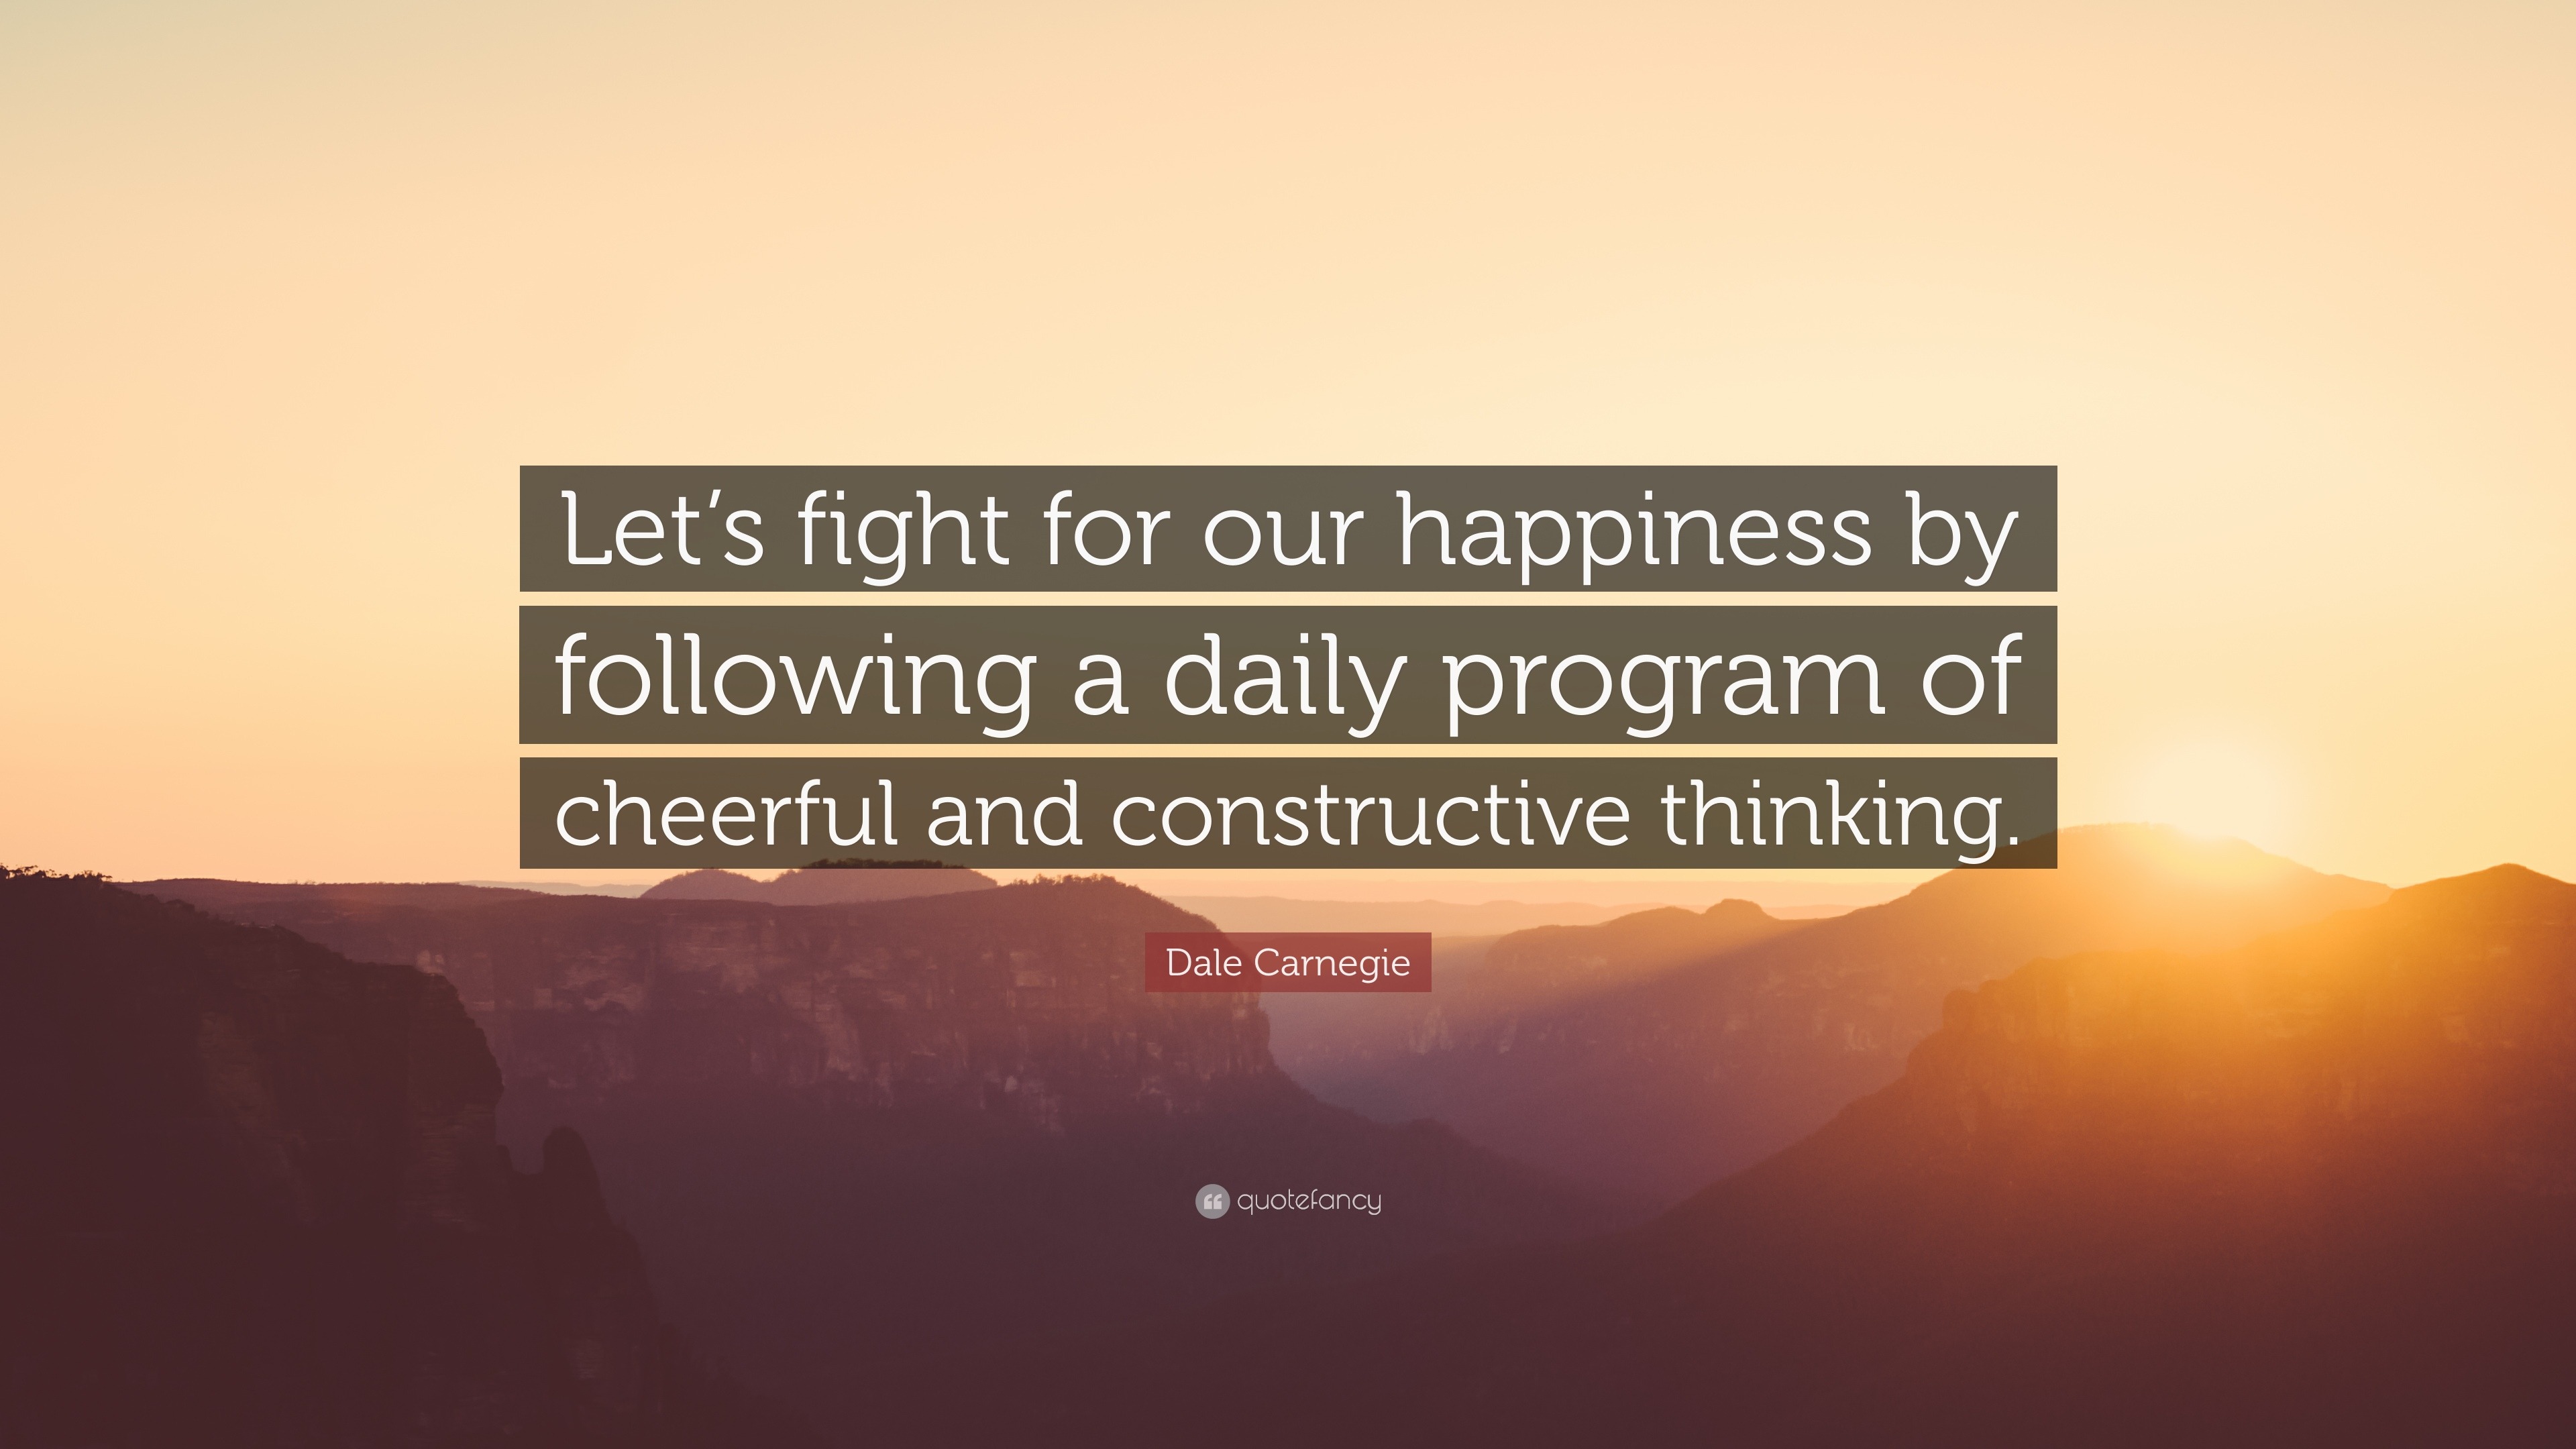 Dale Carnegie Quote: “Let's fight for our happiness by following a daily  program of cheerful and